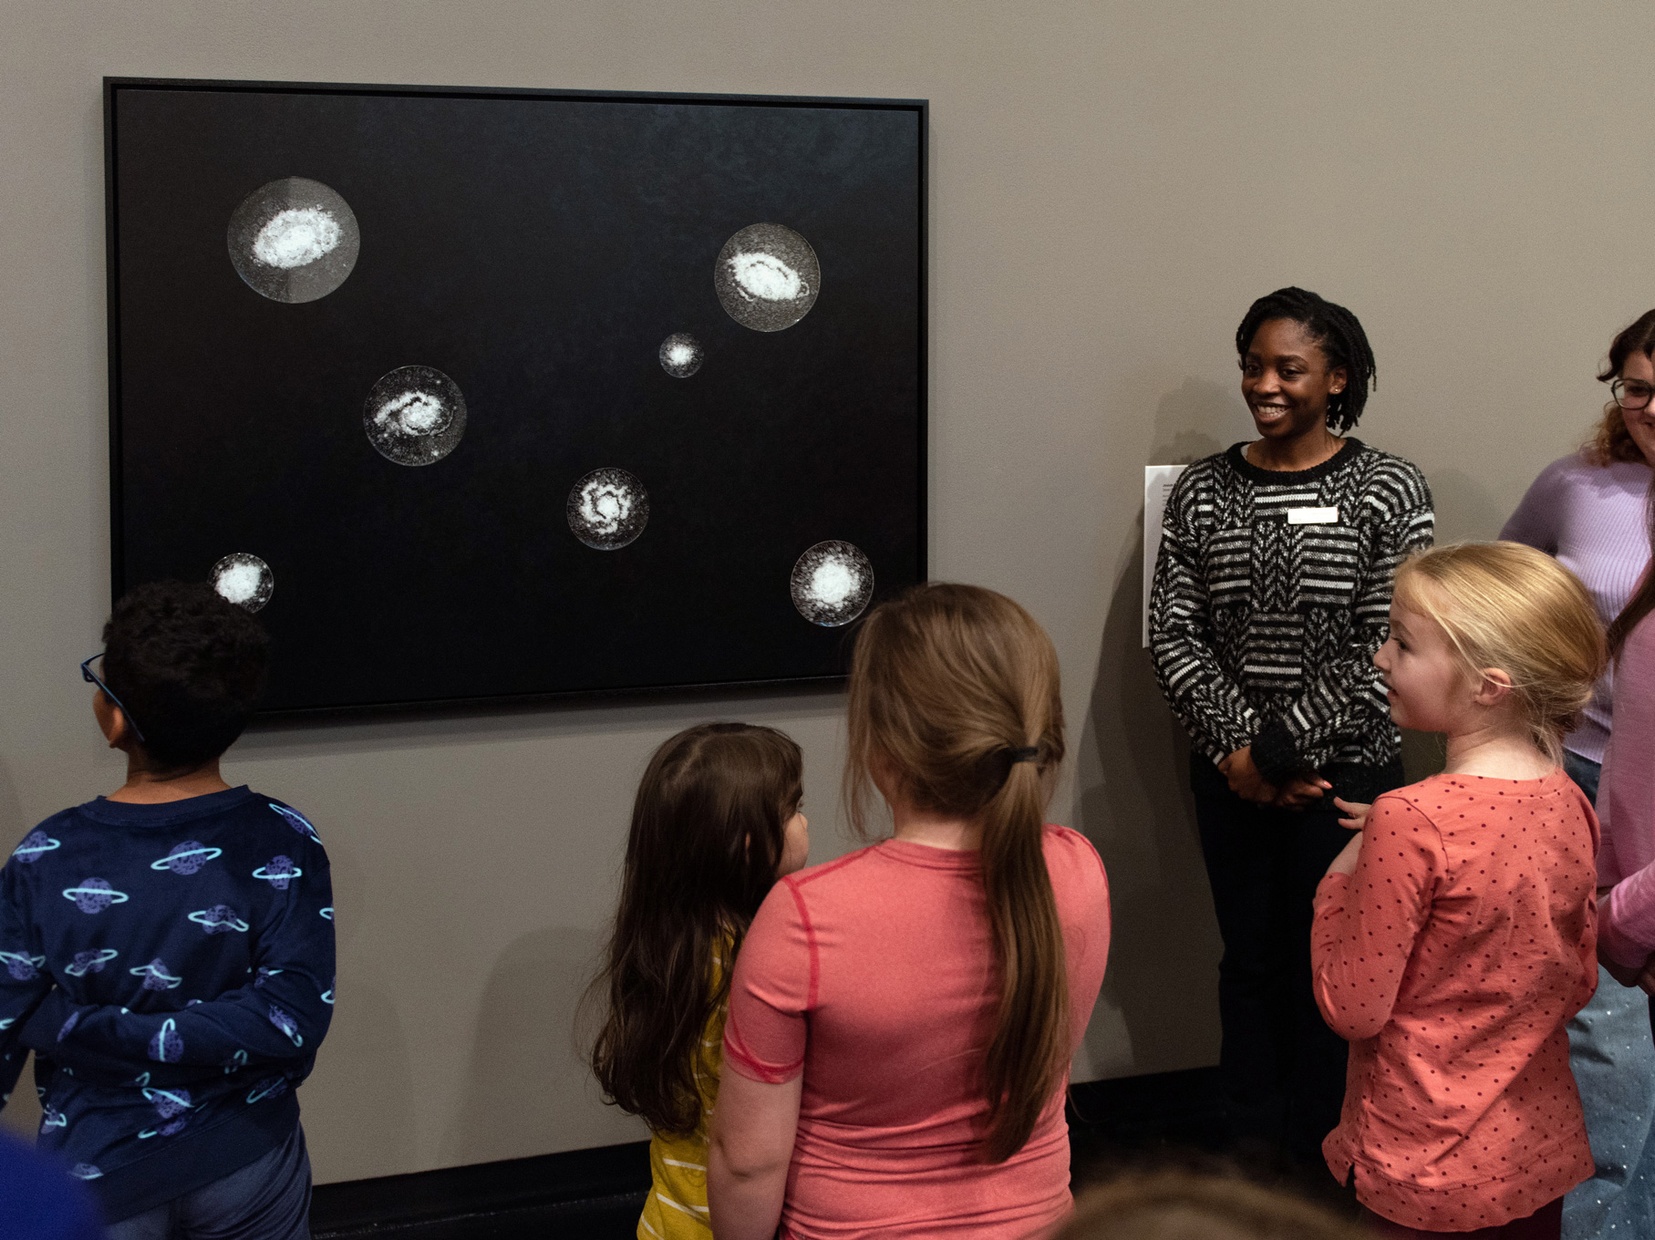 A Black woman stands next to an artwork hanging on the wall and looks out towards a group of children with their backs to us, observing the artwork.